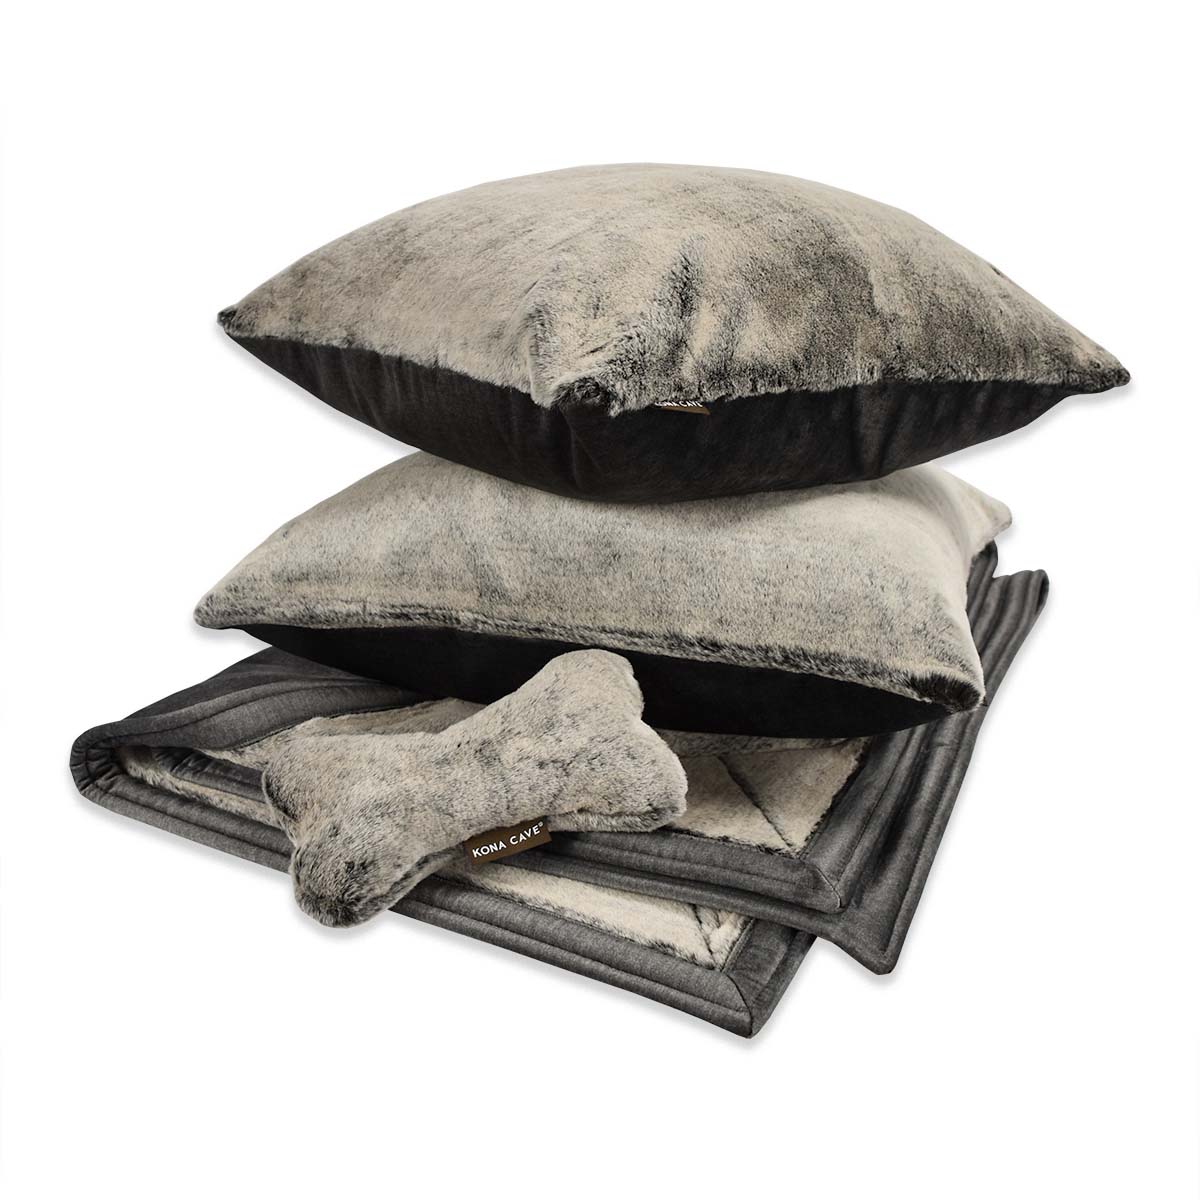 KONA CAVE® luxury faux fur and velvet dog gift set. Human quality faux fur. Set includes thick blanket, pillow covers and luxury faux fur 